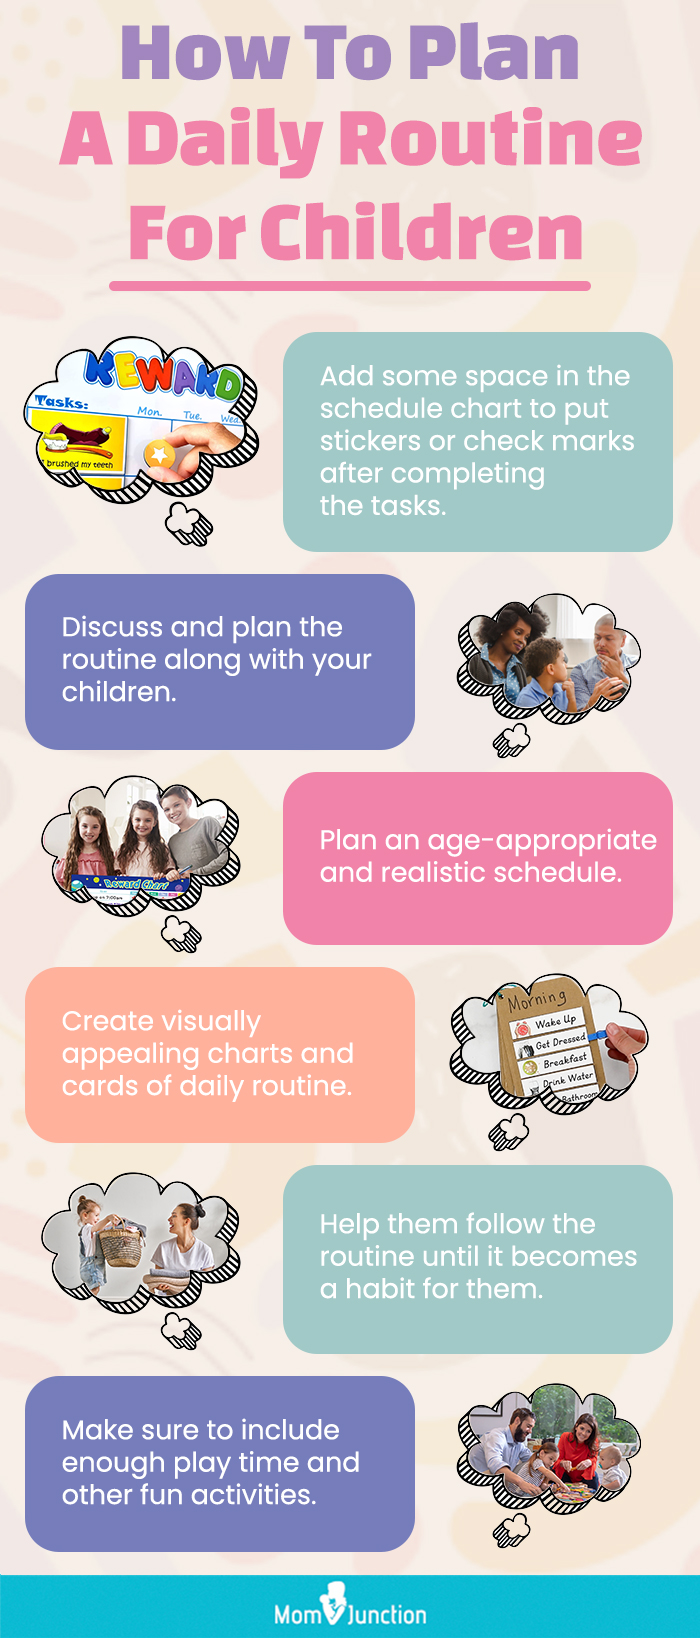 how to plan a daily routine for children (infographic)